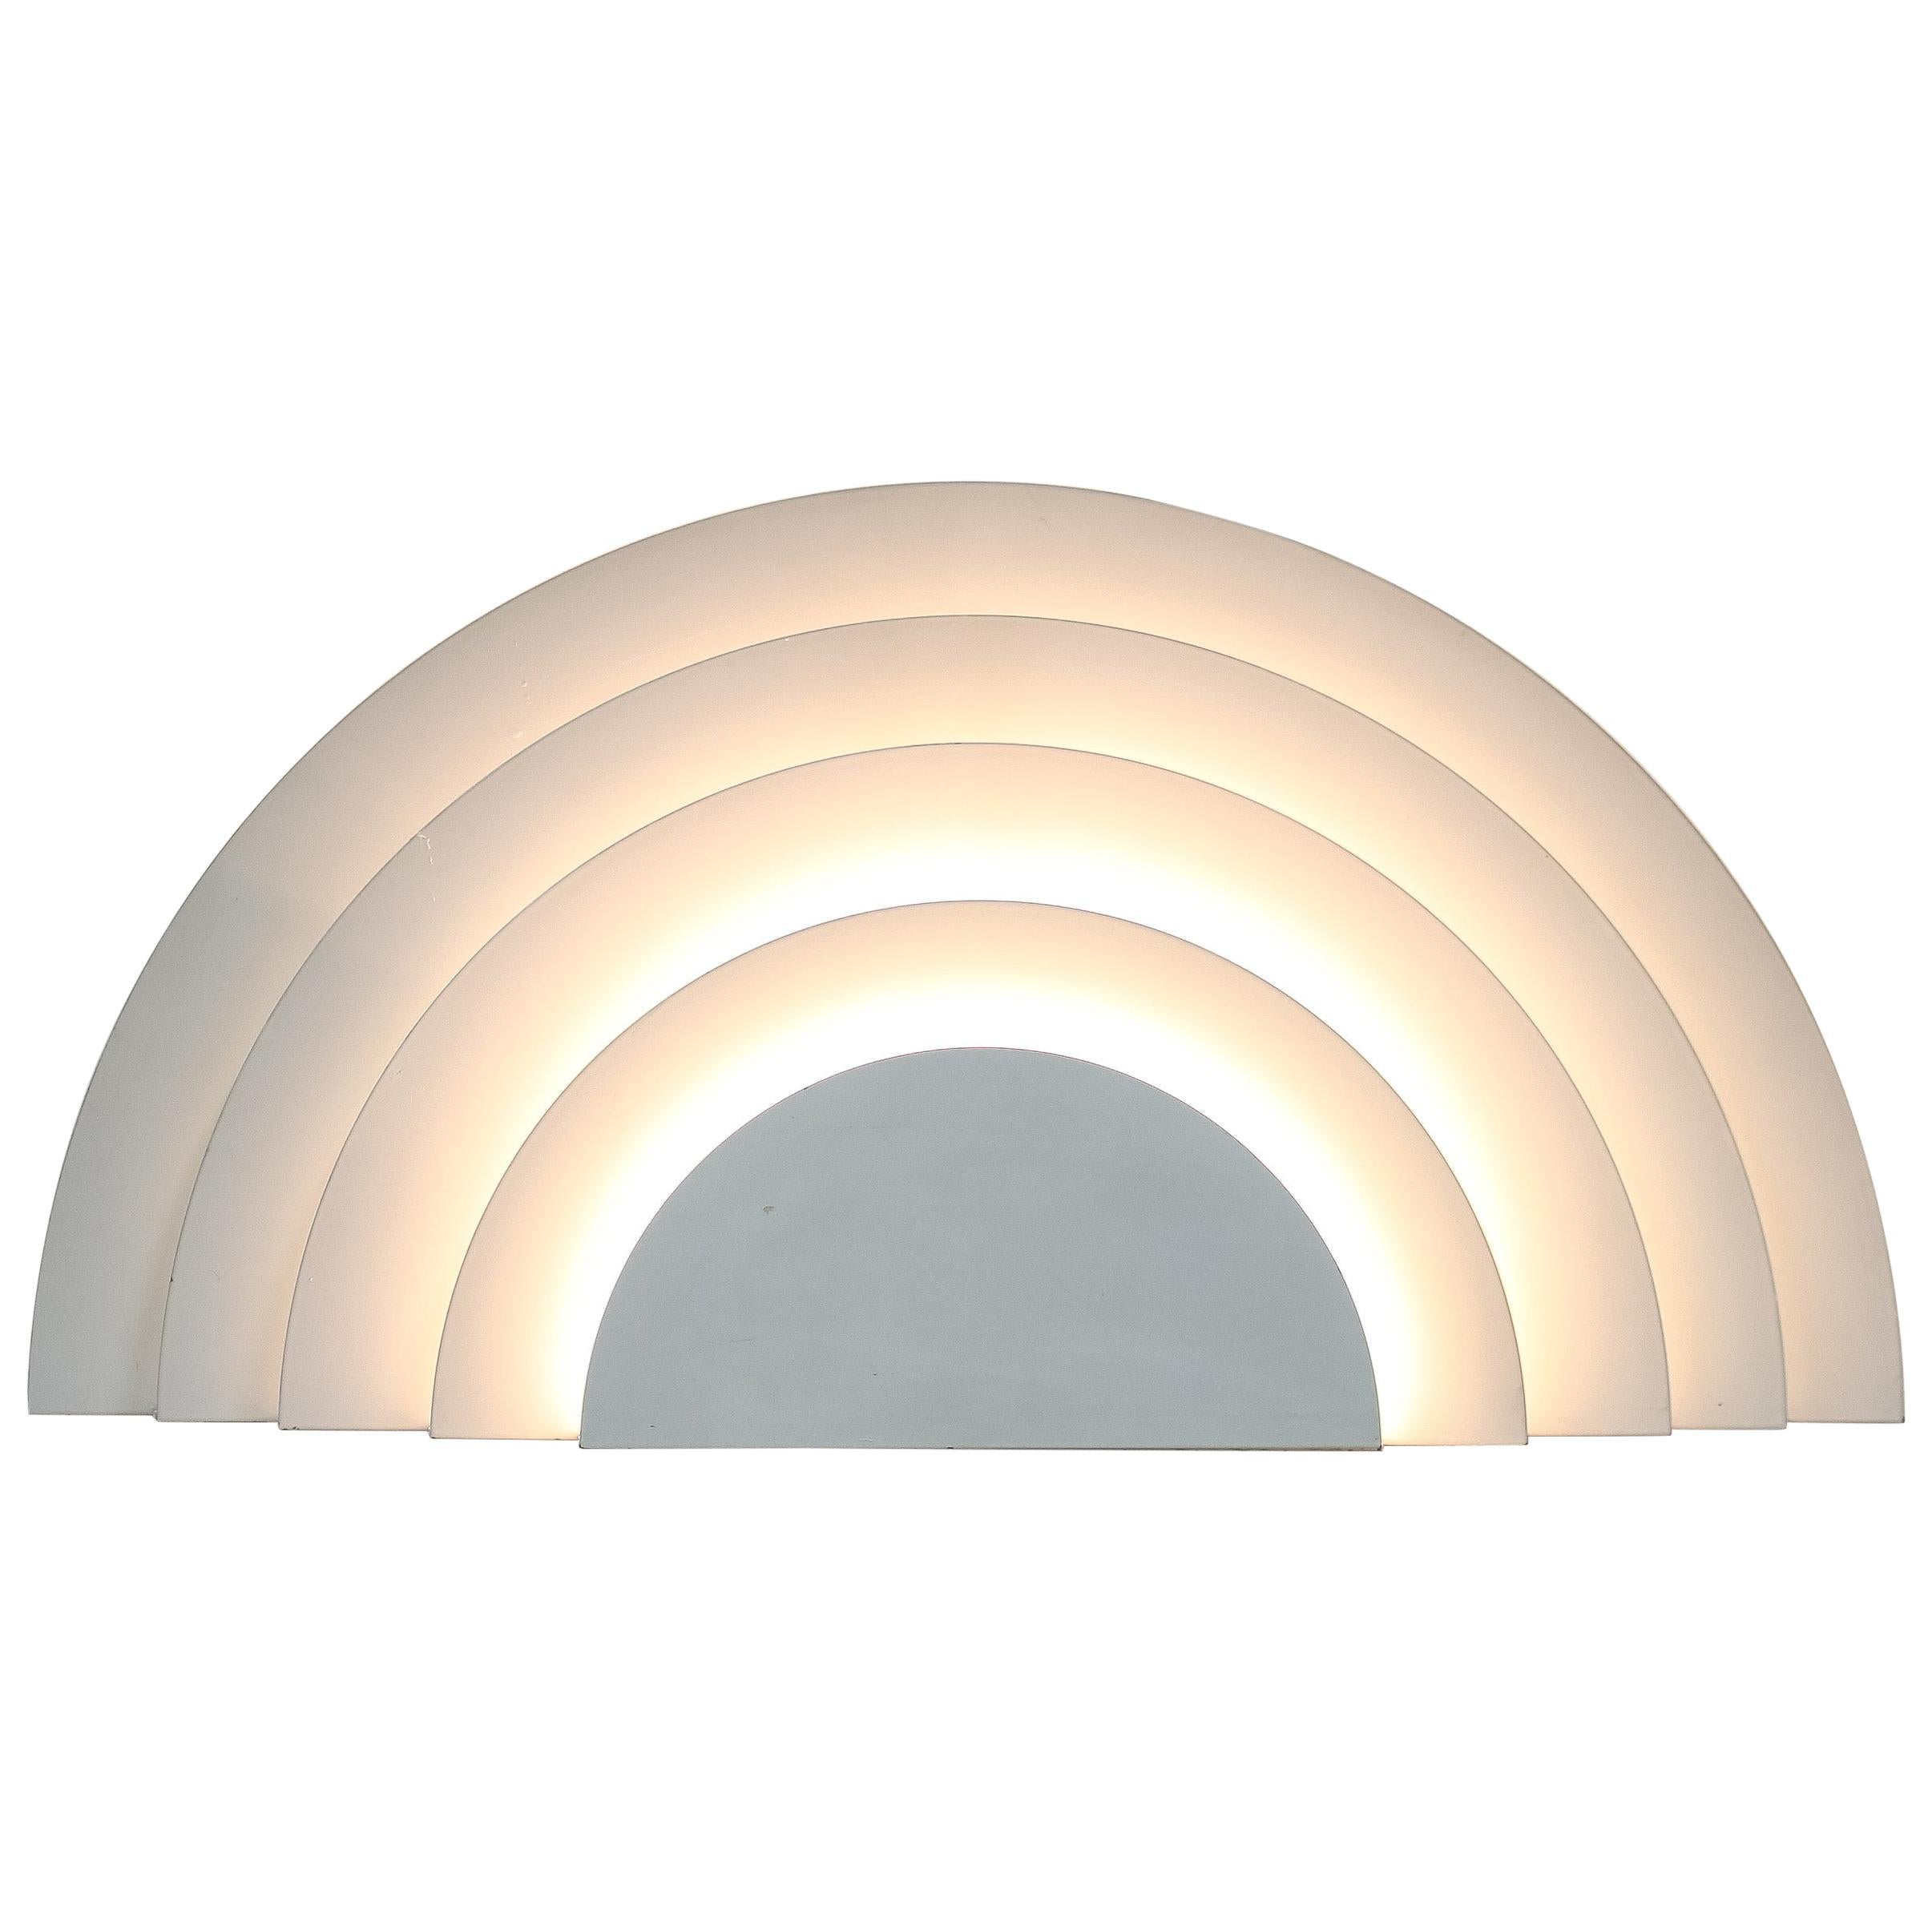 Meander Wall Sconce by Cesare Casati and Emanuele Ponzio for RAAK, Netherlands